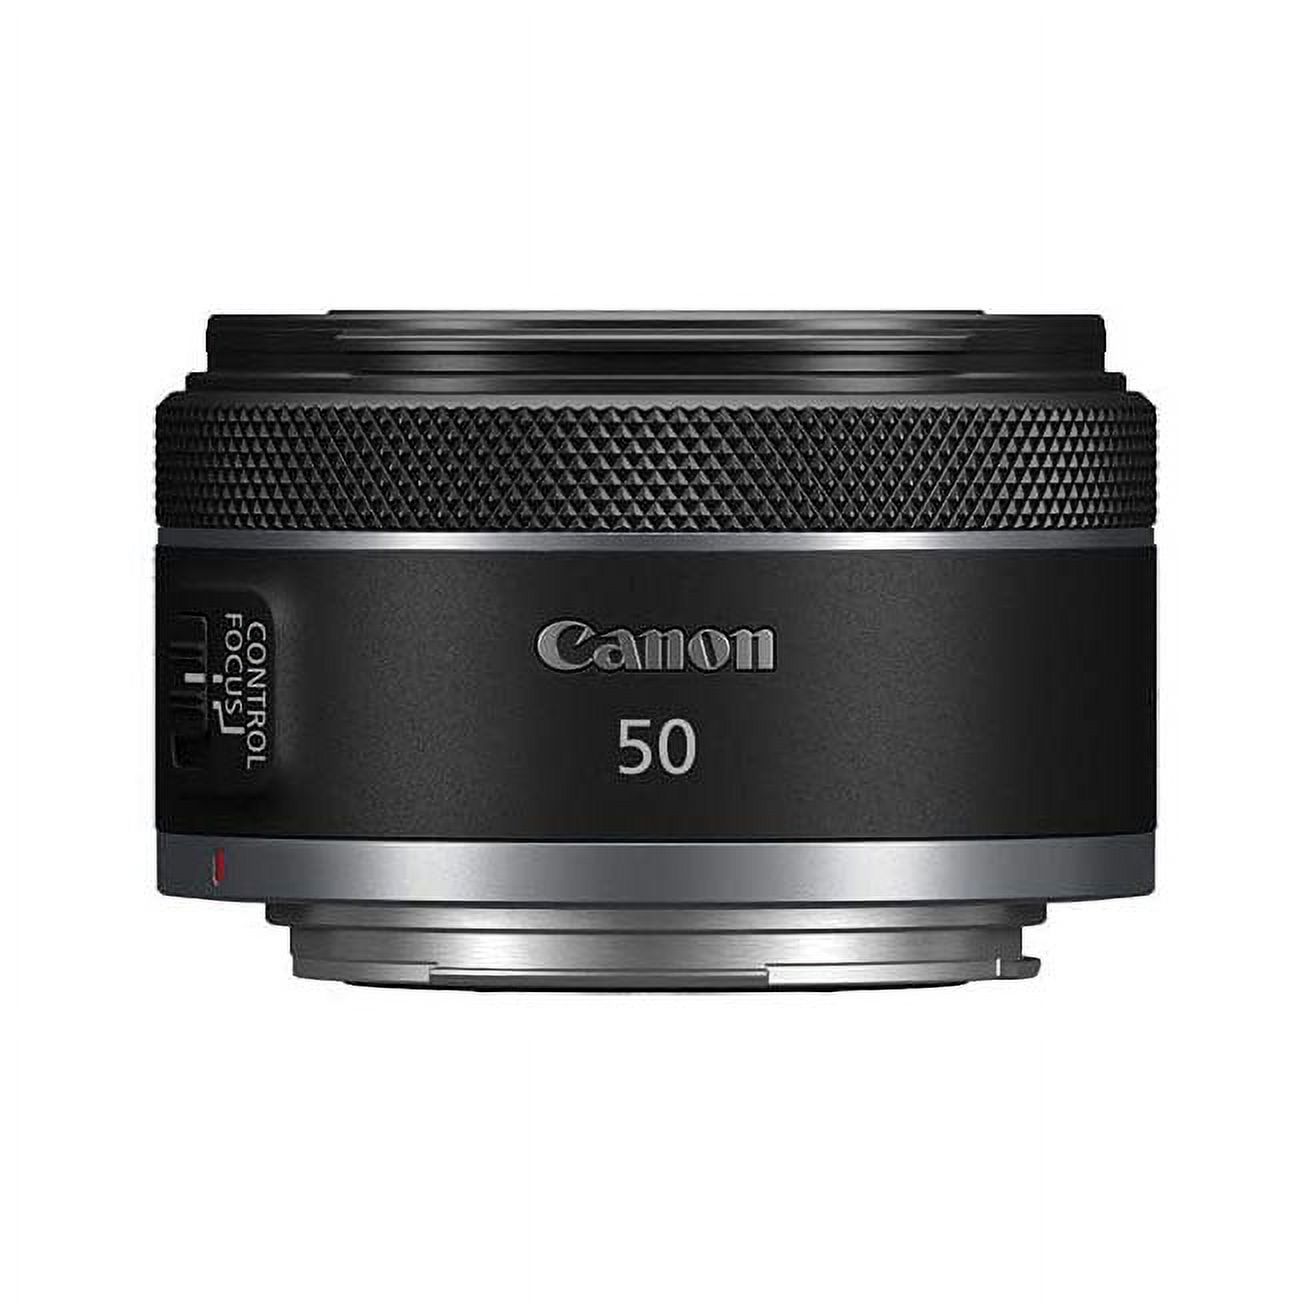 Canon RF50mm F1.8 STM for Canon Full Frame Mirrorless RF Mount Cameras [EOS R, EOS RP, EOS R5, EOS R6](4514C002) - image 4 of 4